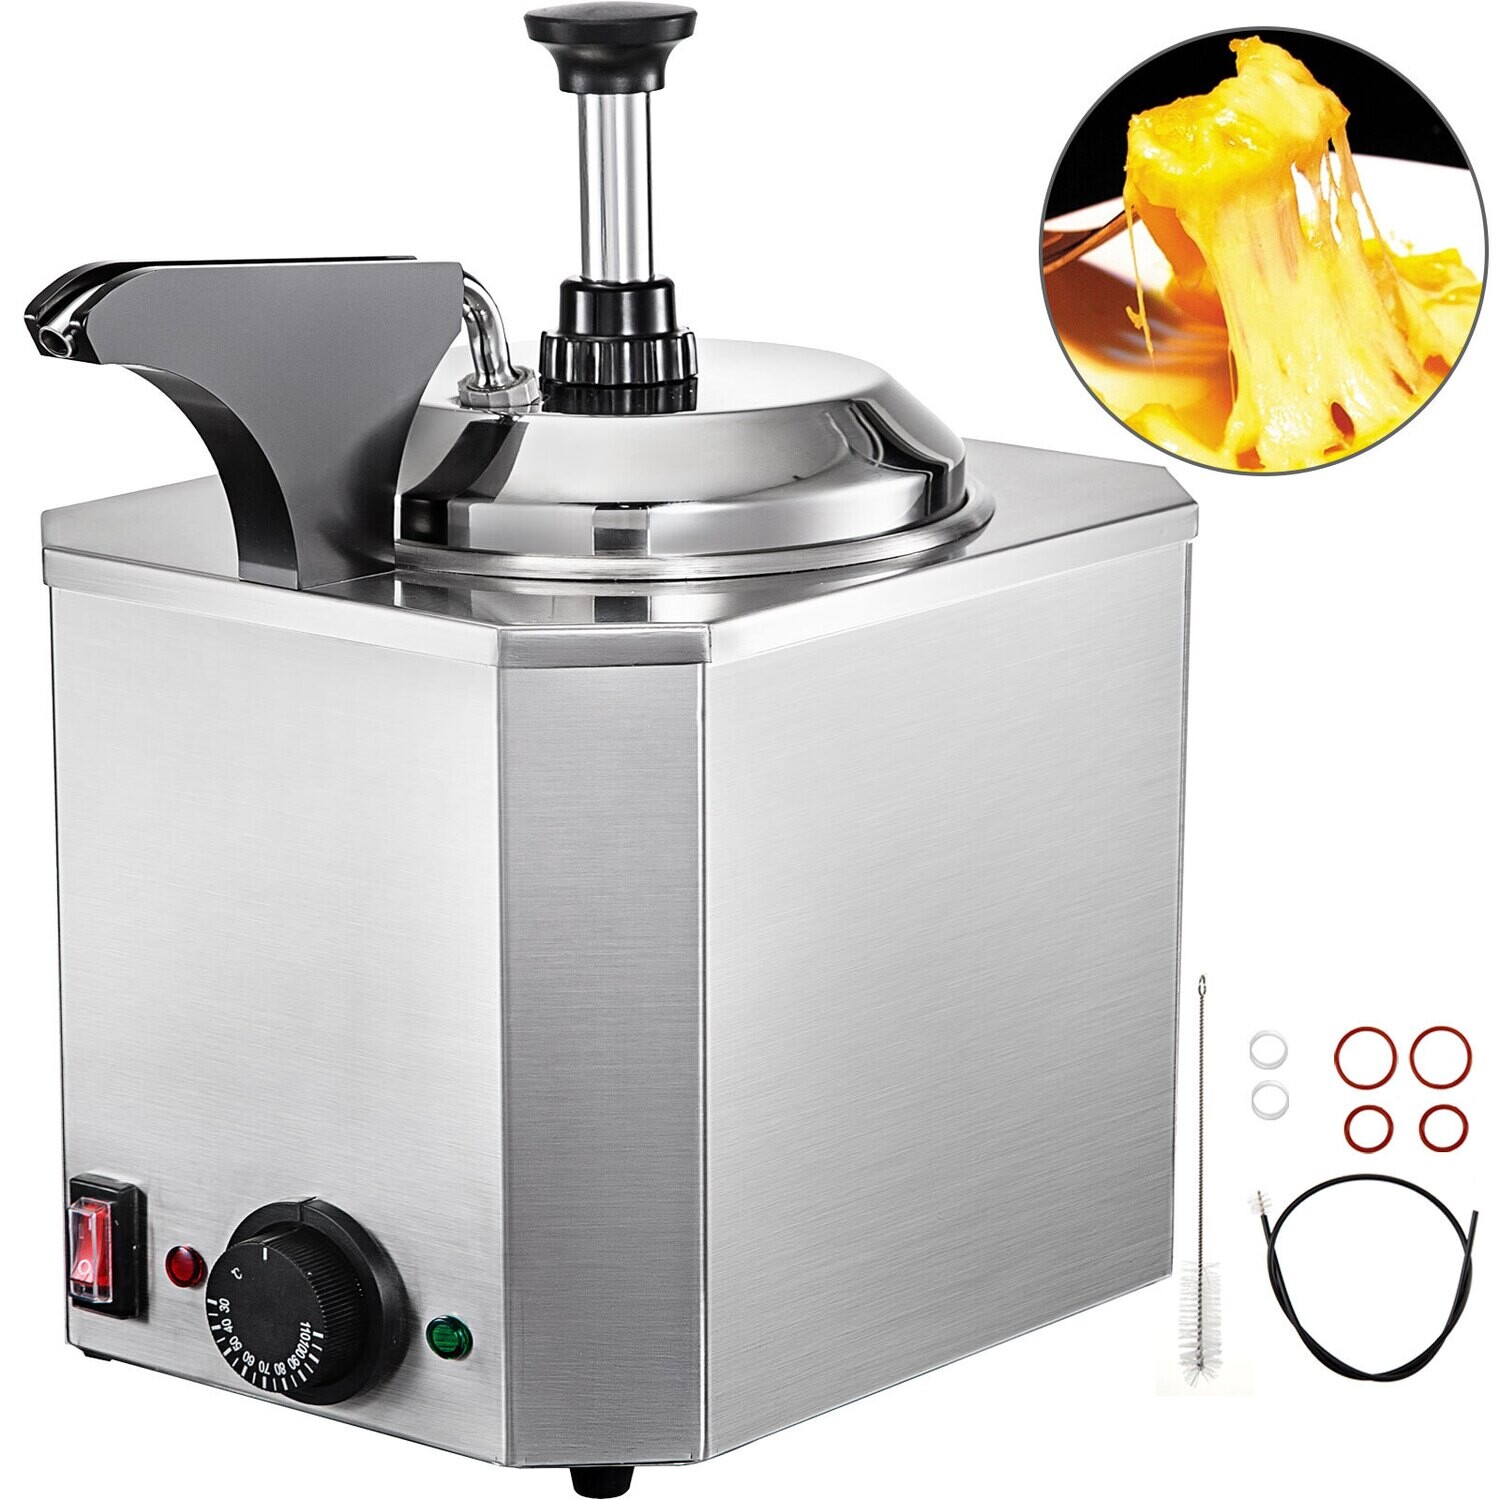 Pump for Fudge Warmer and Hot Cheese Steel, stainless 1 Pump Nacho Cheese Warmer